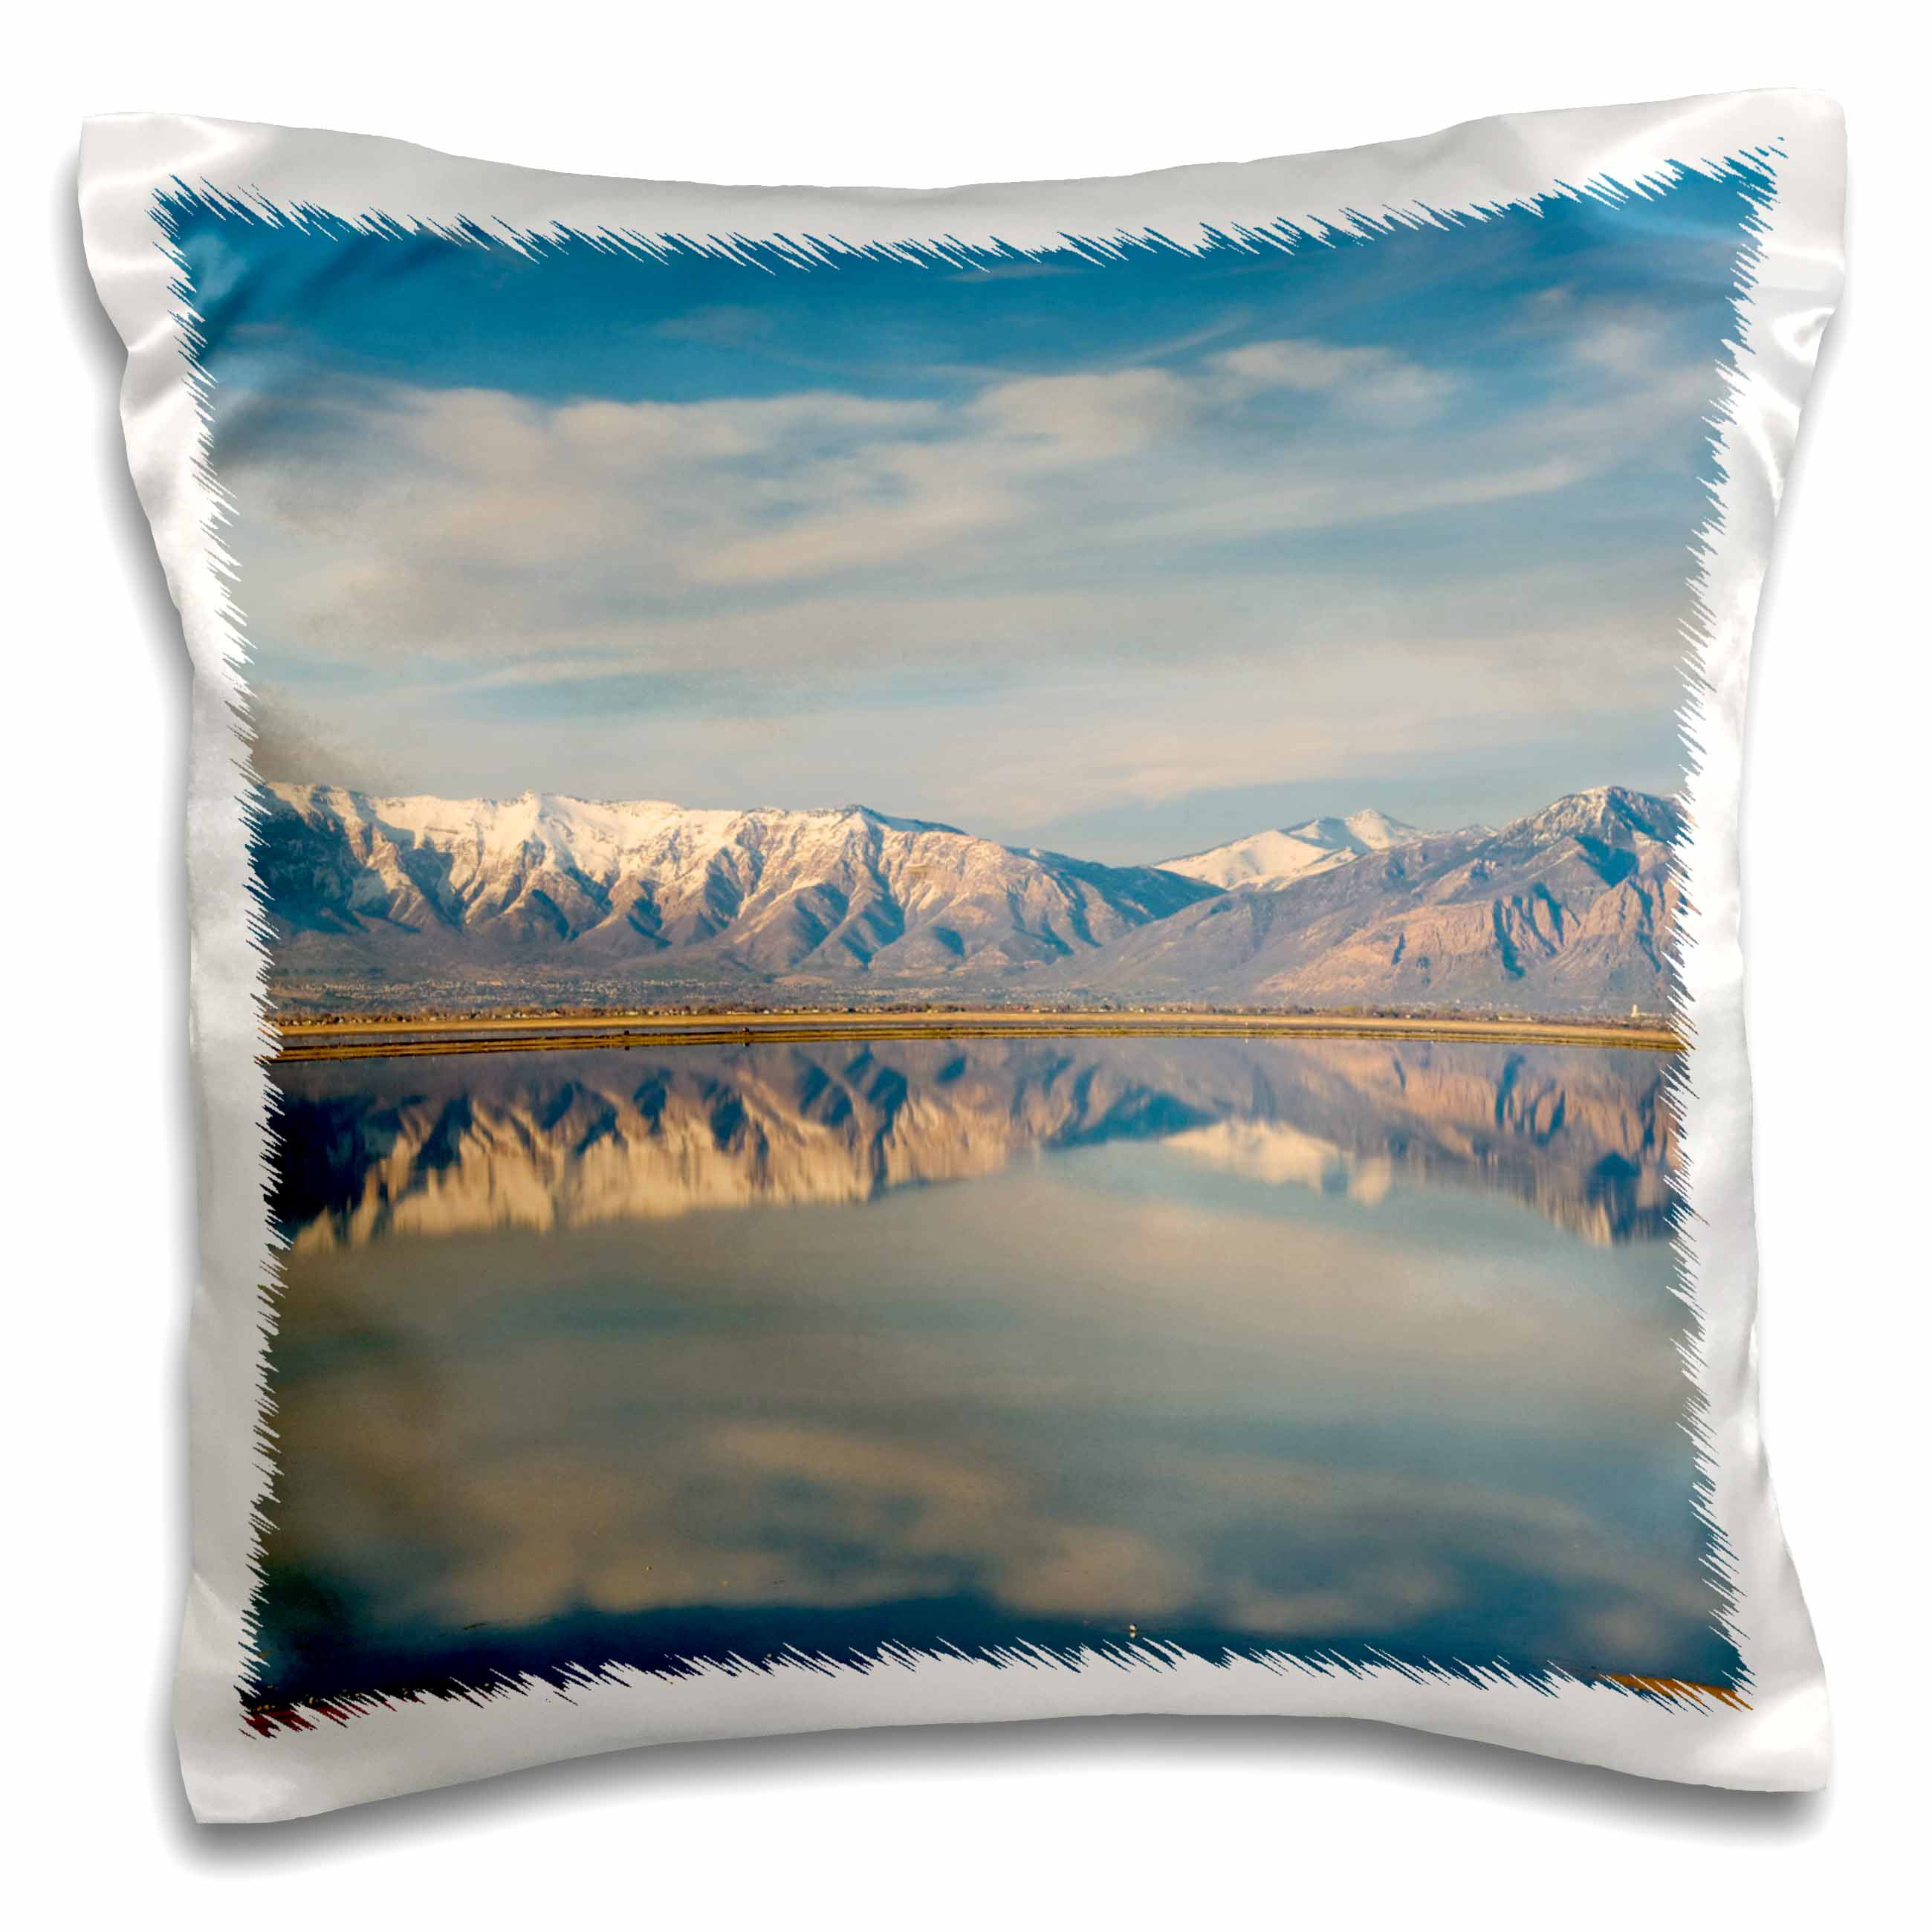 pc_147316_1 Wasatch Mountains Utah Mt Nebo USA-Us45 Hga0426-Howie Garber-Pillow Case 3dRose Quaking Aspen 16 by 16